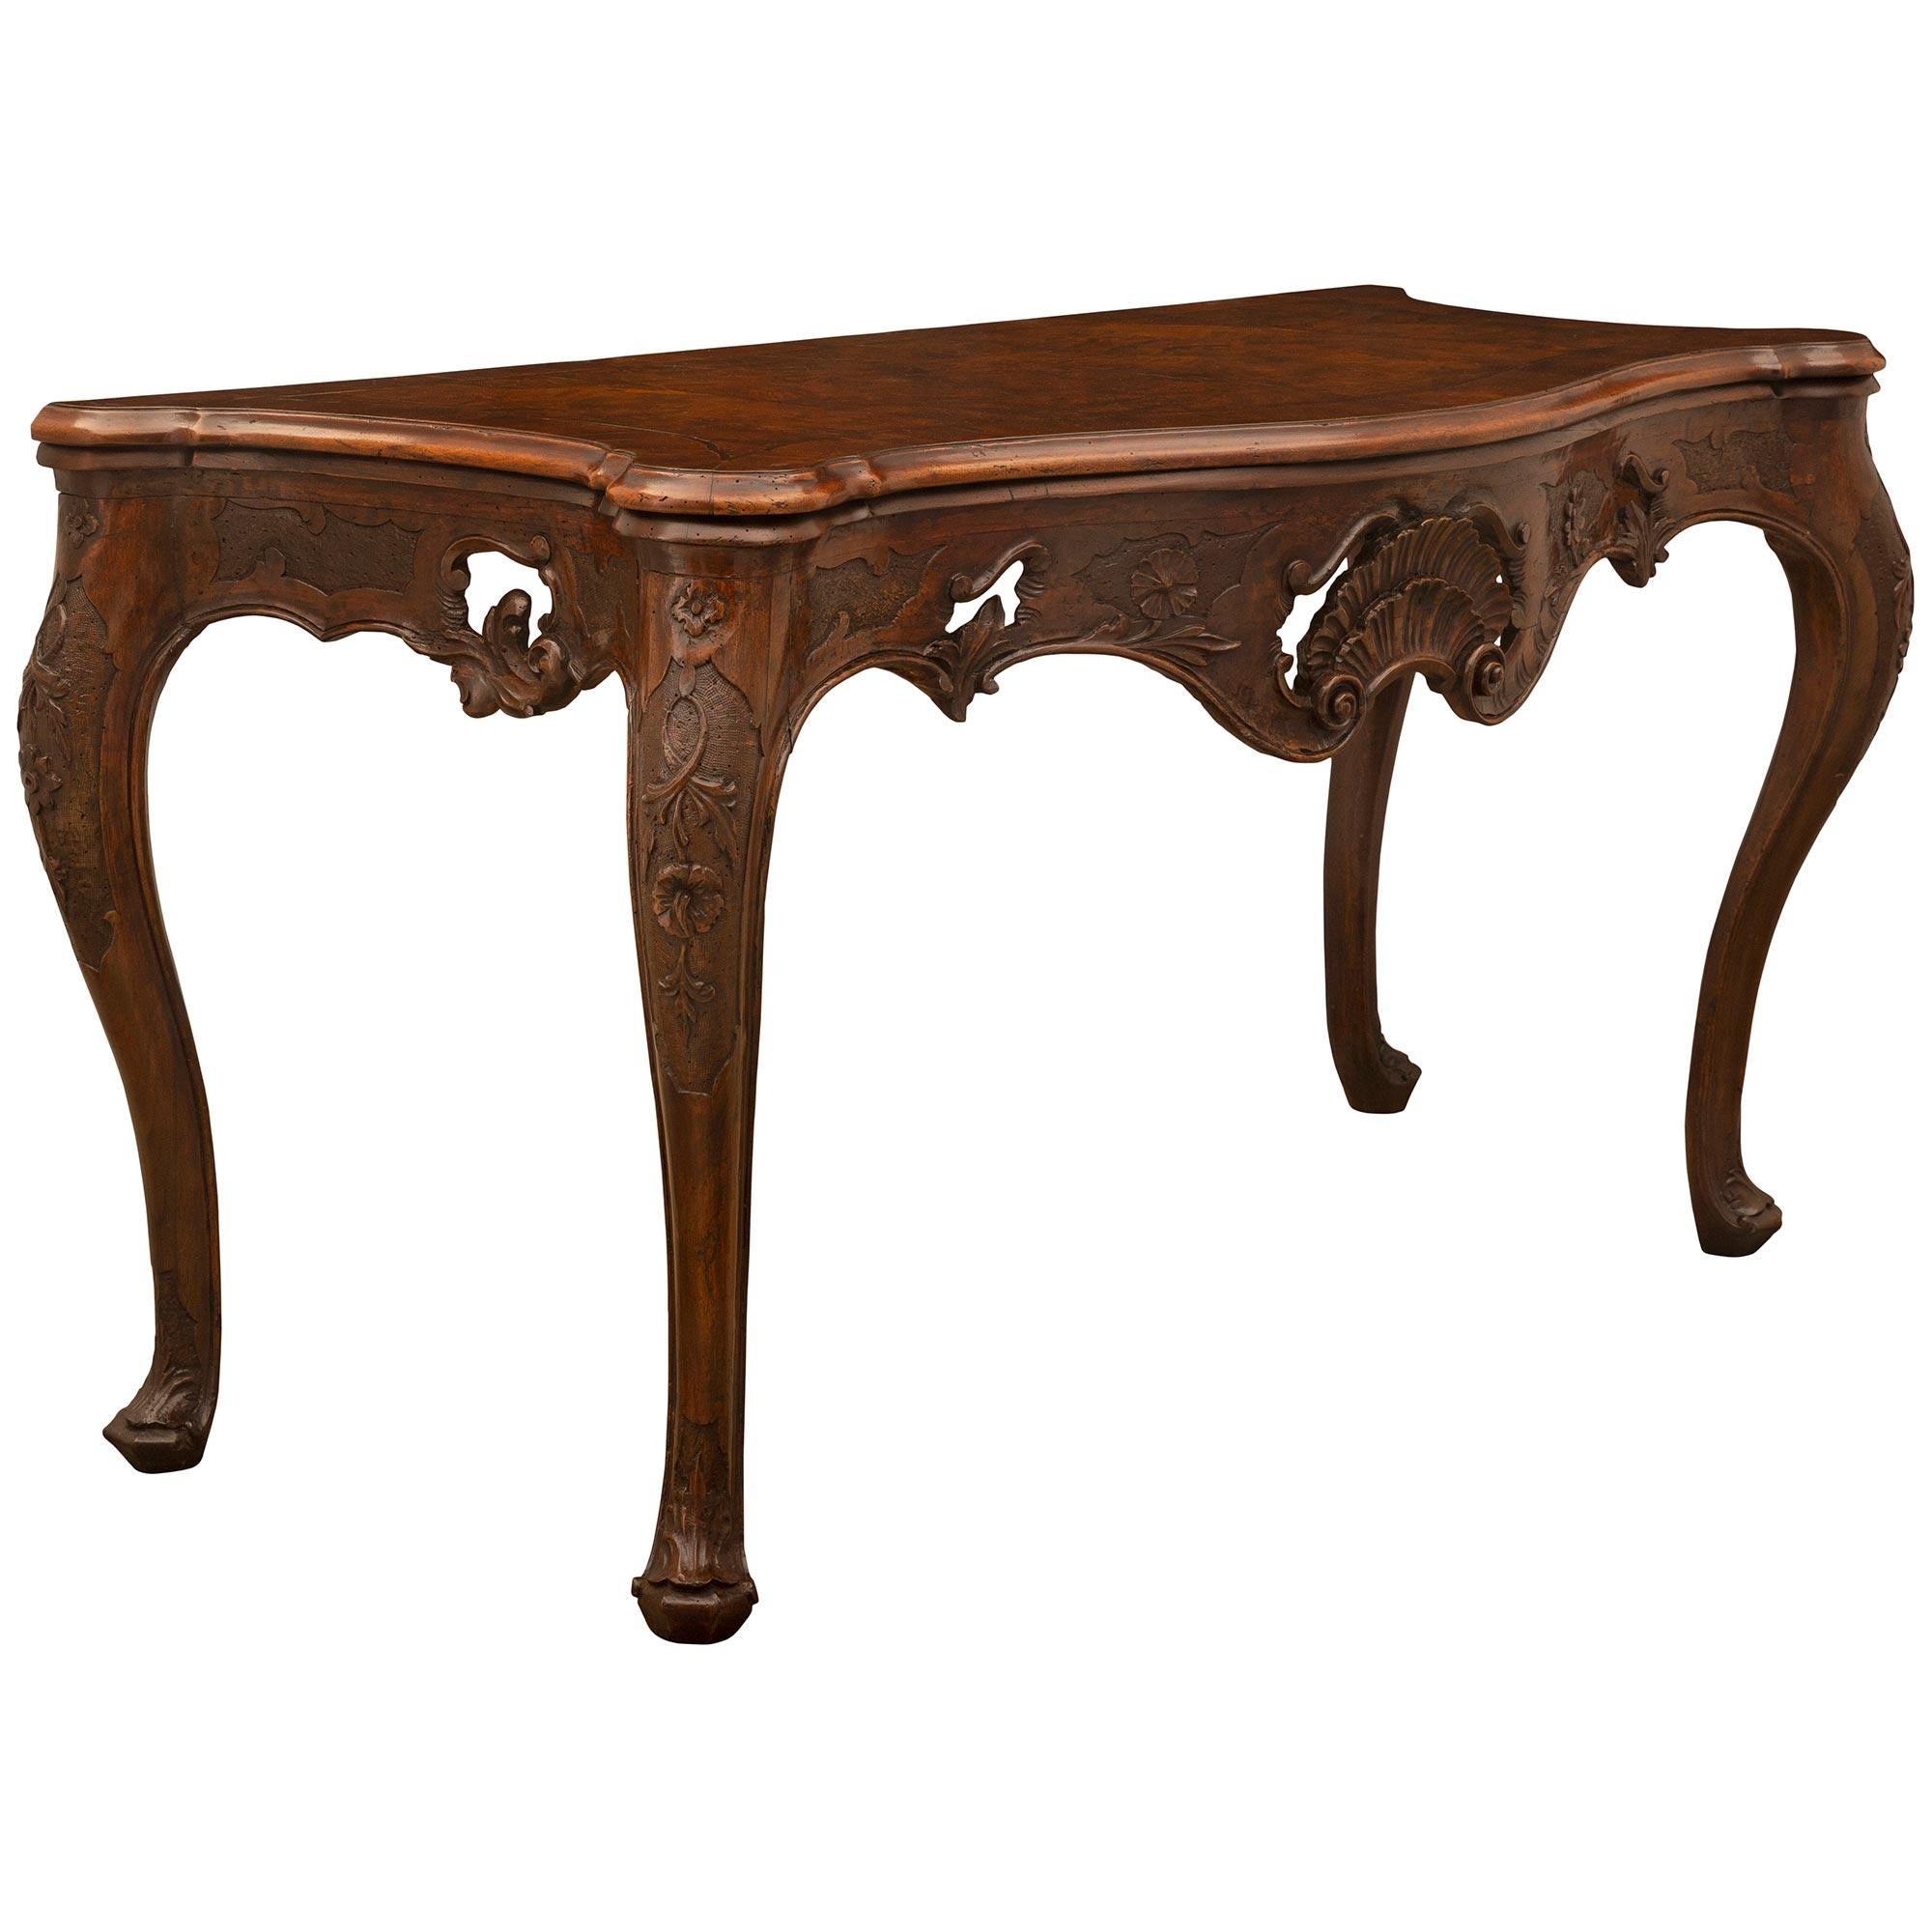 Italian 18th Century Louis XV Period Walnut and Burl Walnut Console from Venice In Good Condition For Sale In West Palm Beach, FL